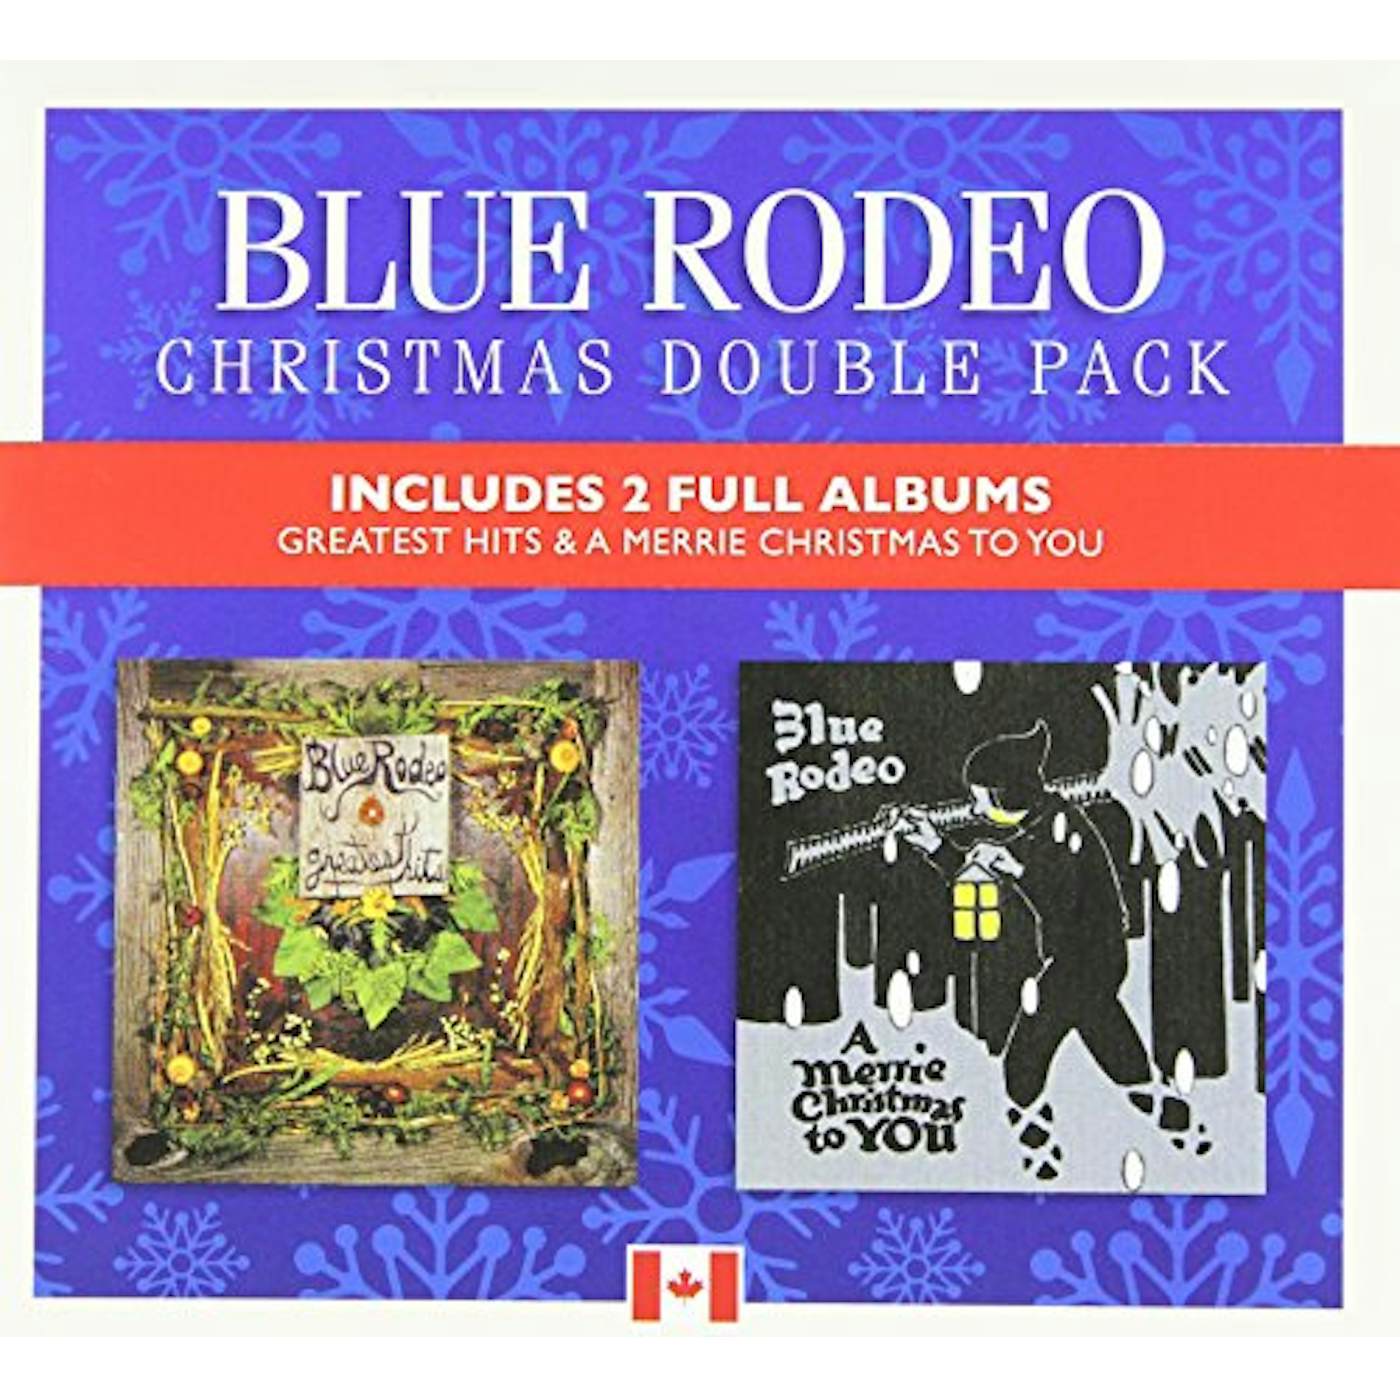 Blue Rodeo CHRISTMAS DOUBLE PACK CD